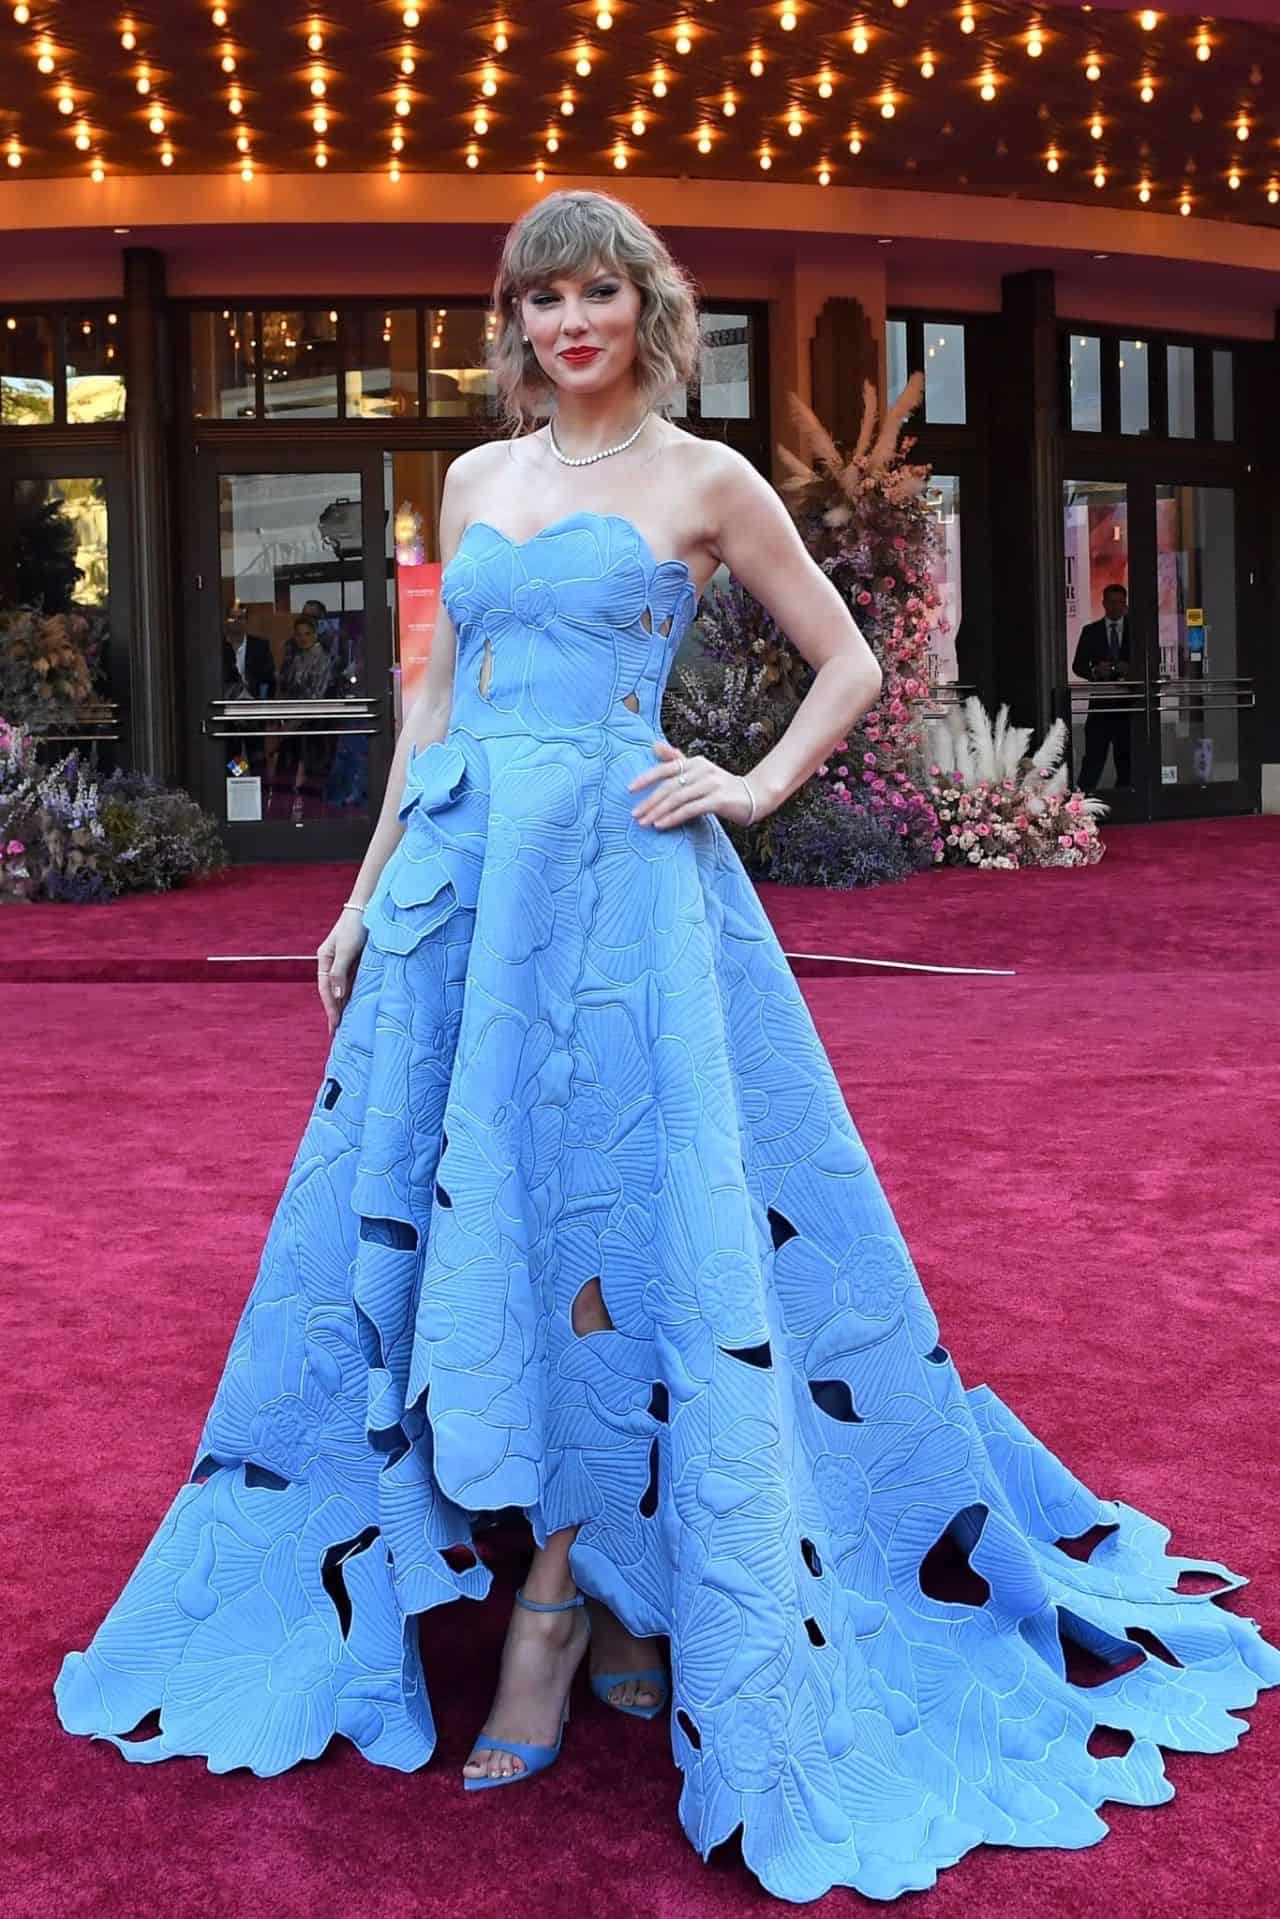 Taylor Swift’s Sparkling Style Steals the Show at Eras Tour Movie Premiere